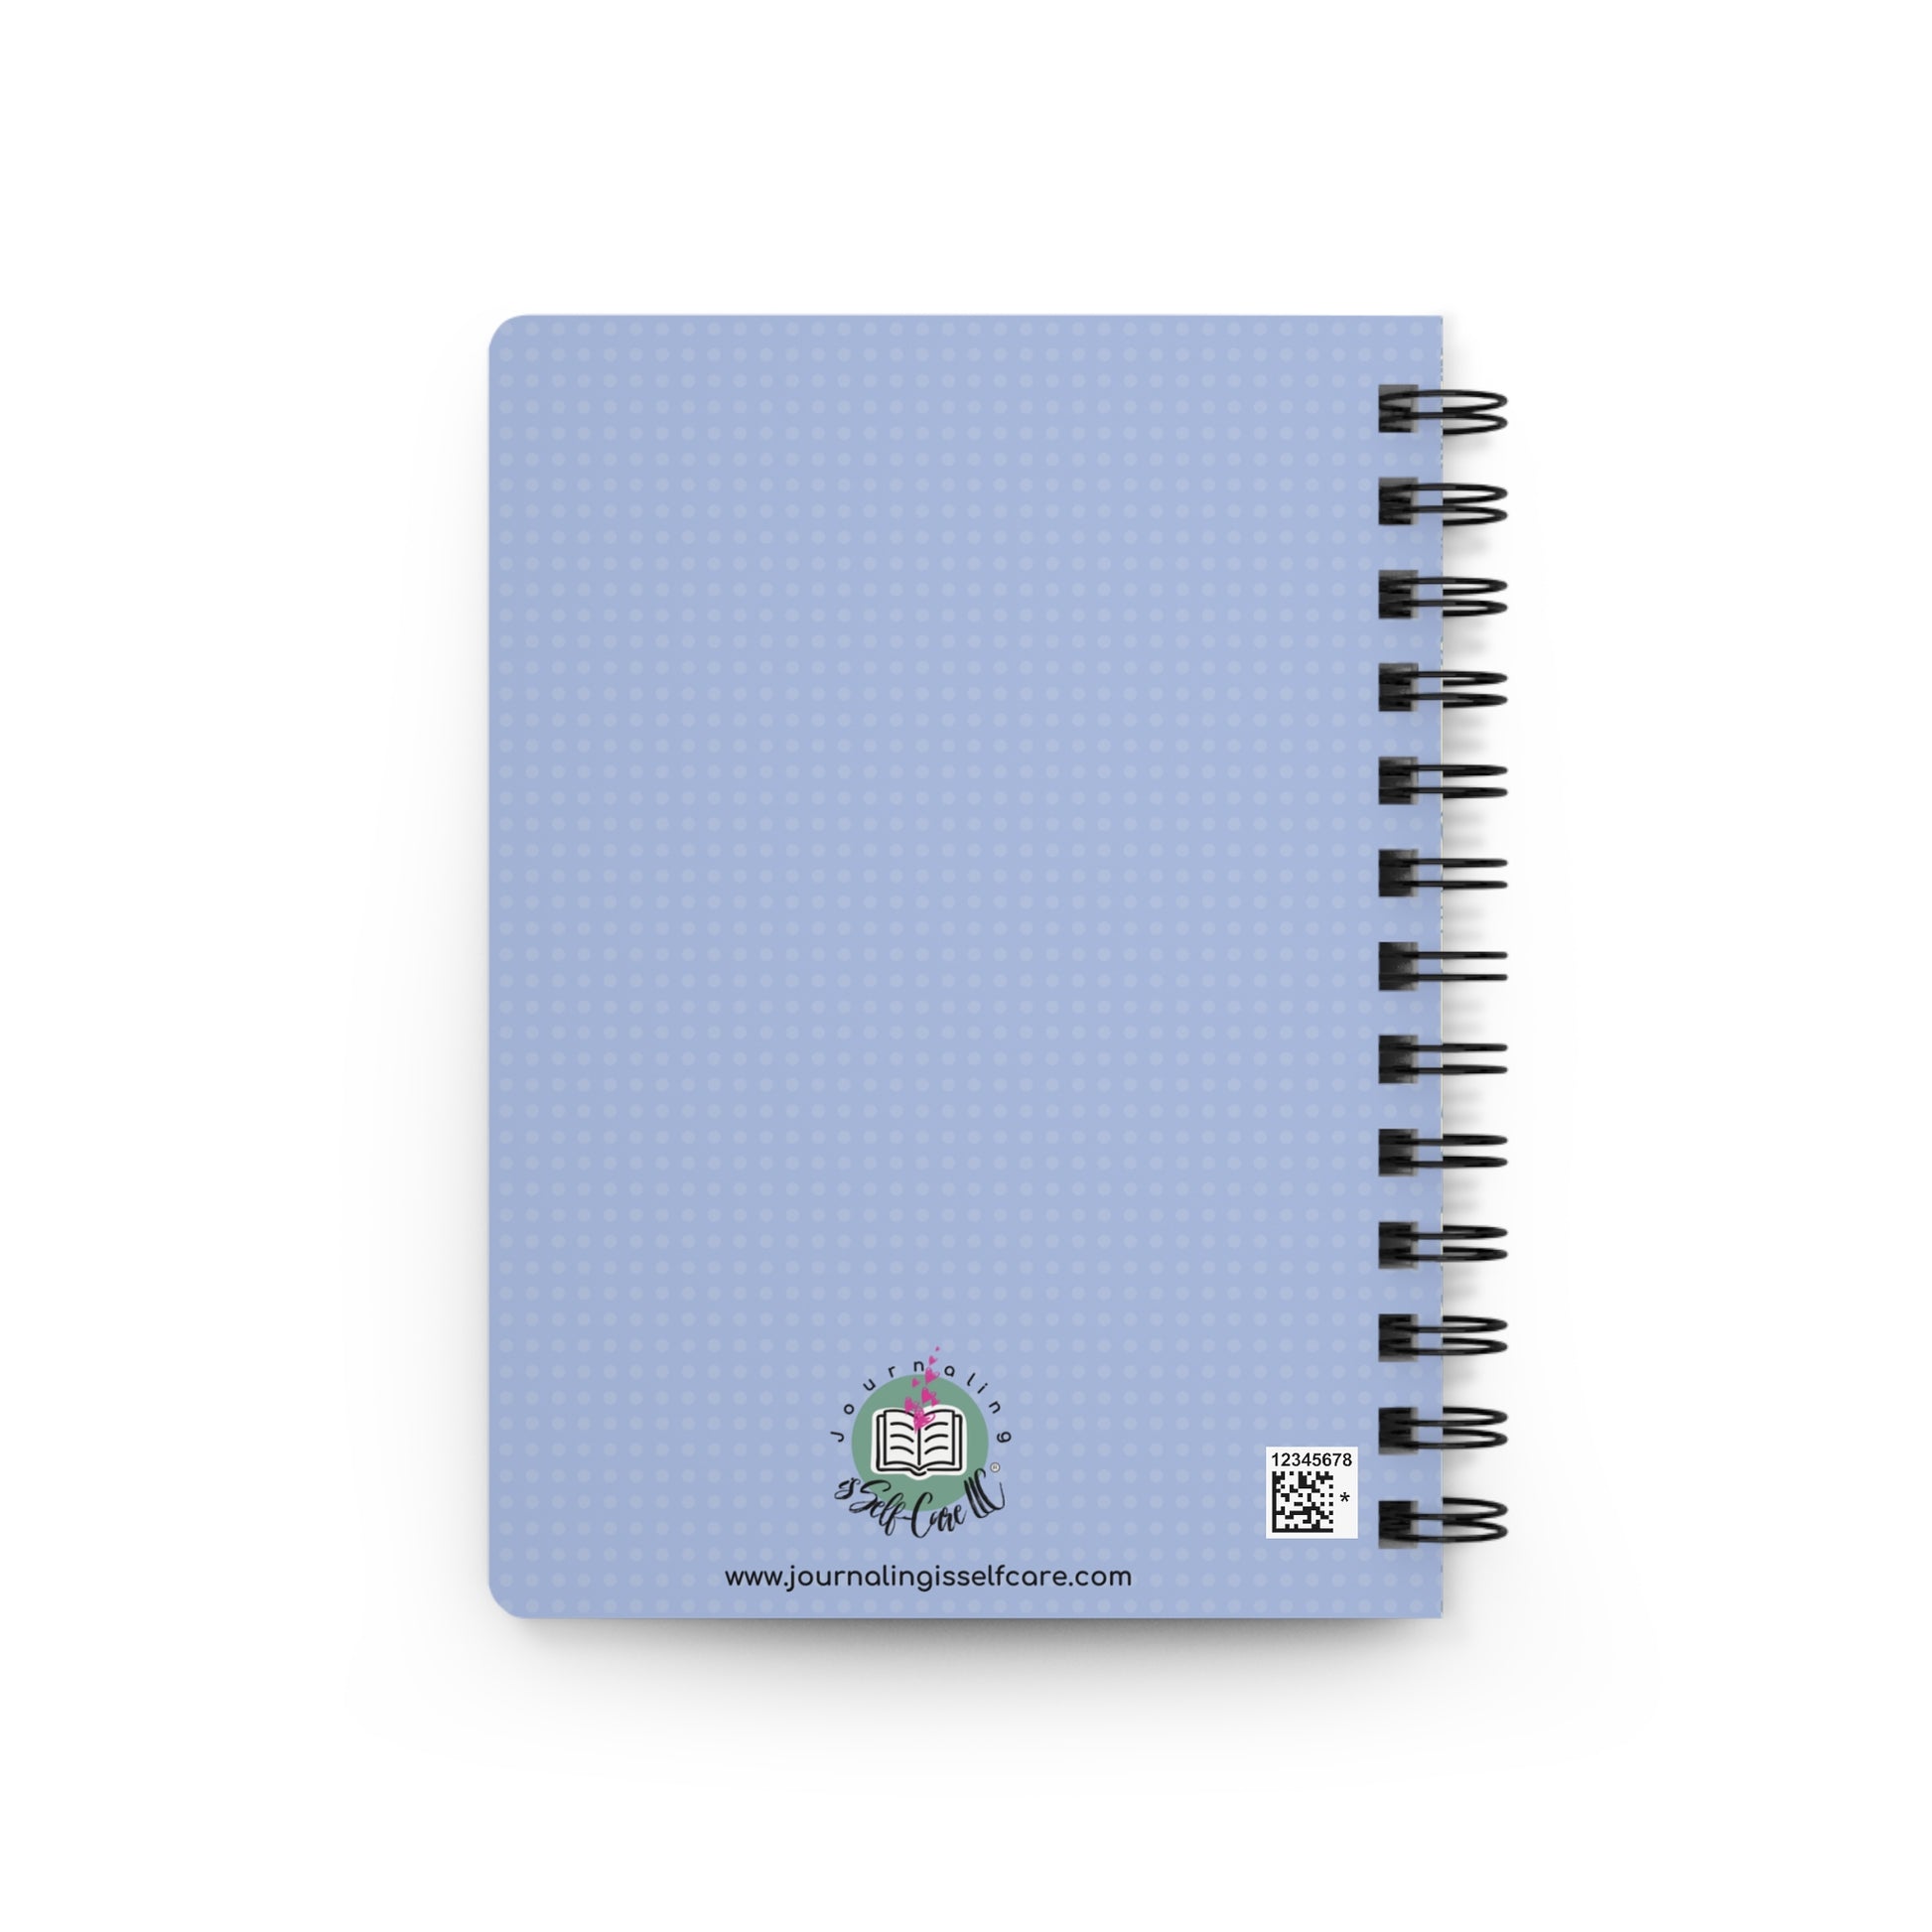 An empowering blue spiral notebook with an image of a house on it, perfect as a Female Empowerment Journal | Feminist Journal for women.